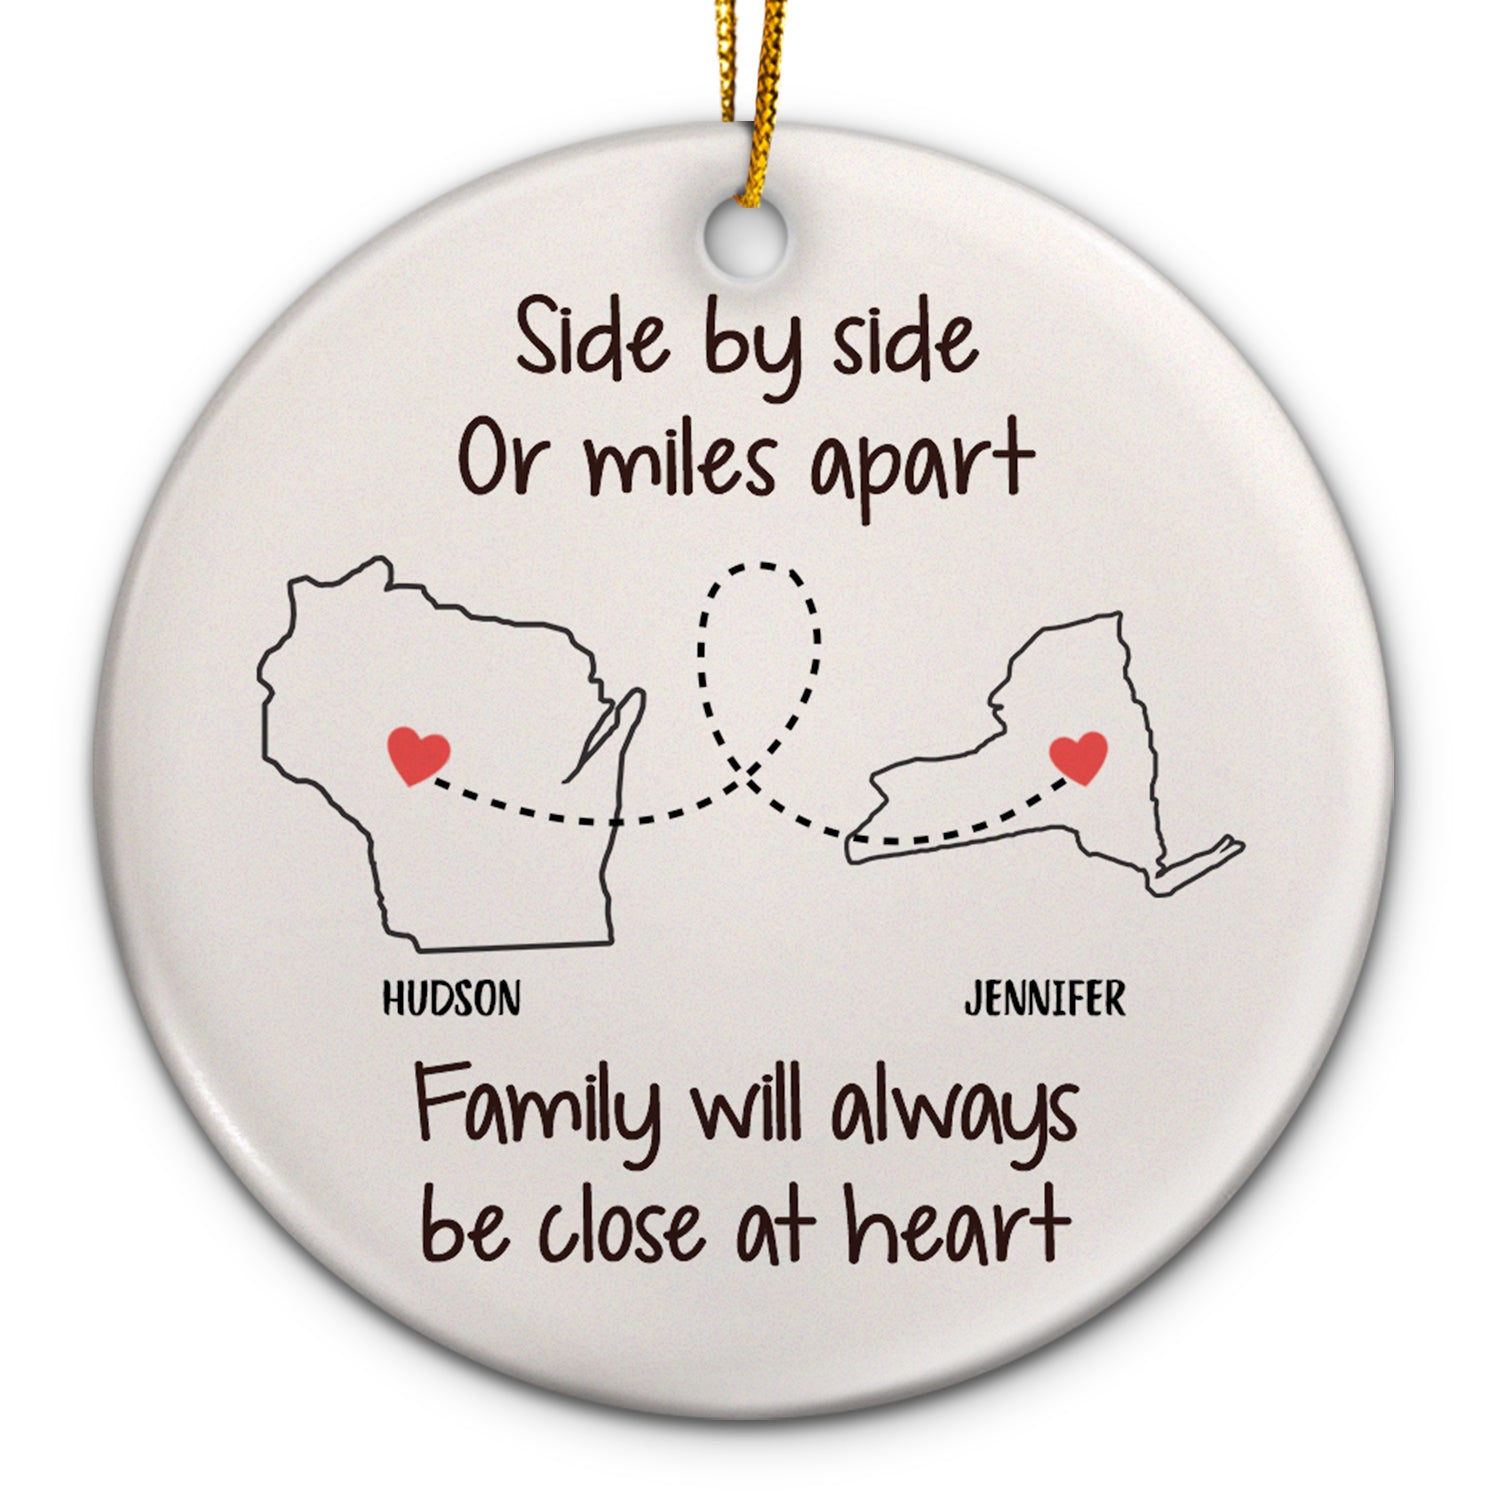 Side By Side Or Miles Apart - Christmas Gift For Family - Personalized Circle Ceramic Ornament